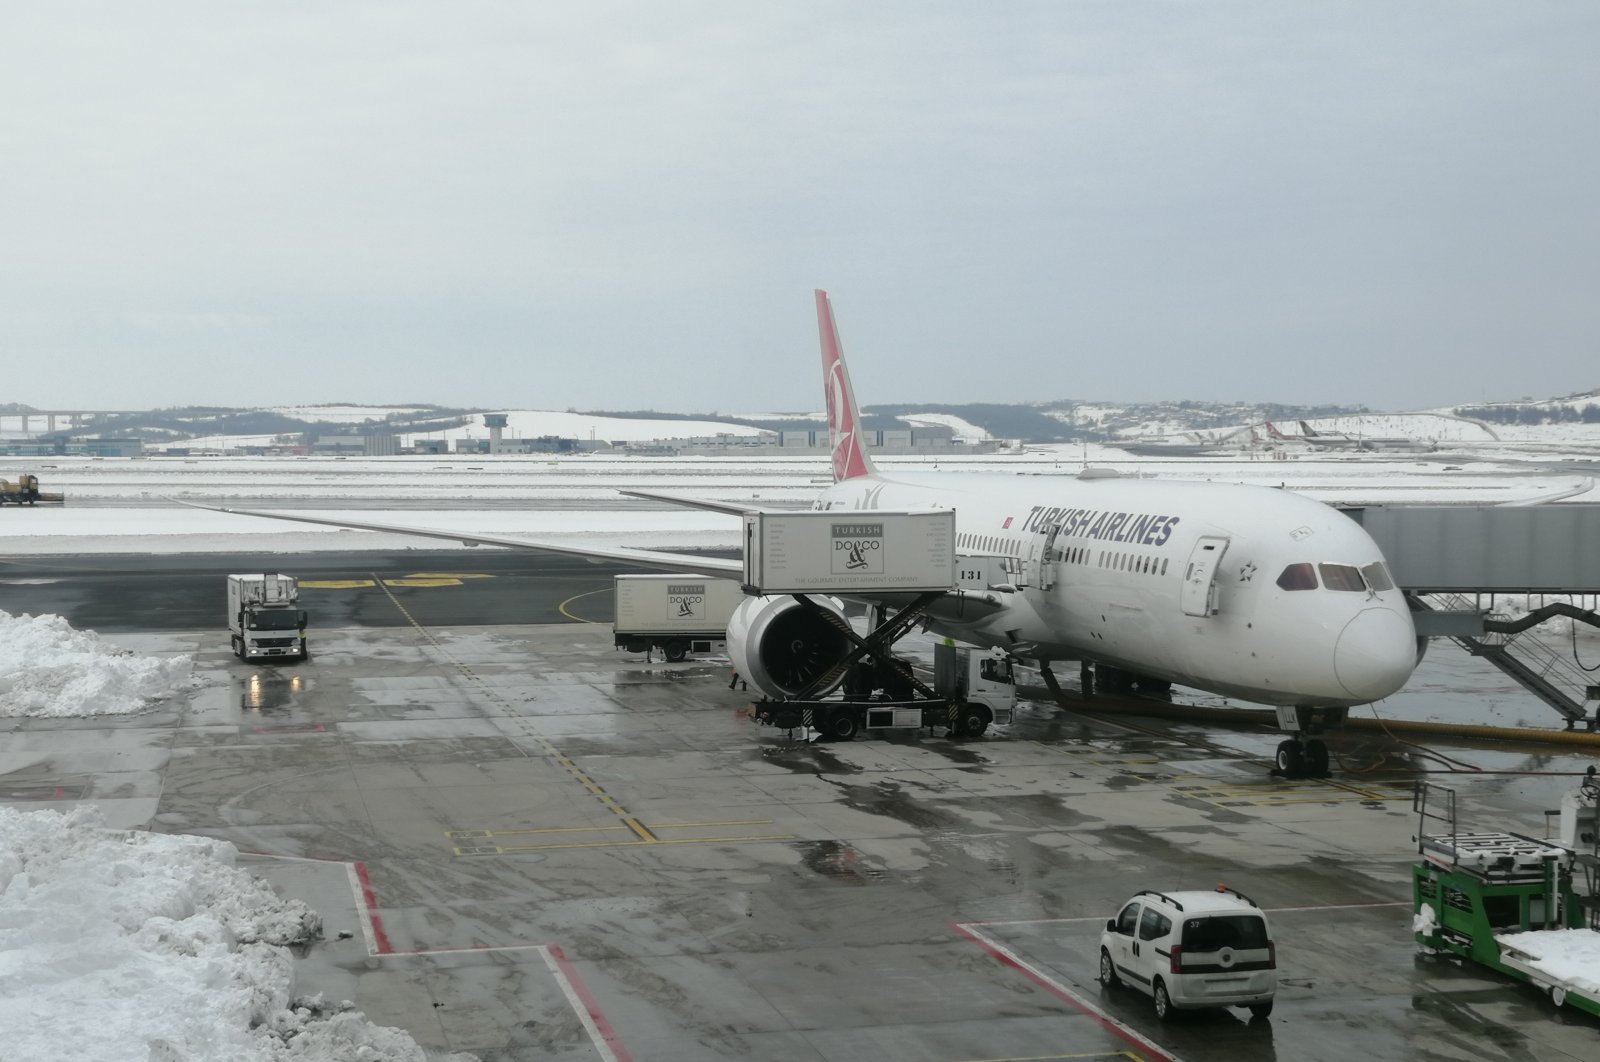 A Turkish Airlines (THY) airplane stands on a runway at the airport, in Istanbul, Turkey, Jan. 27, 2022. (İHA PHOTO) 